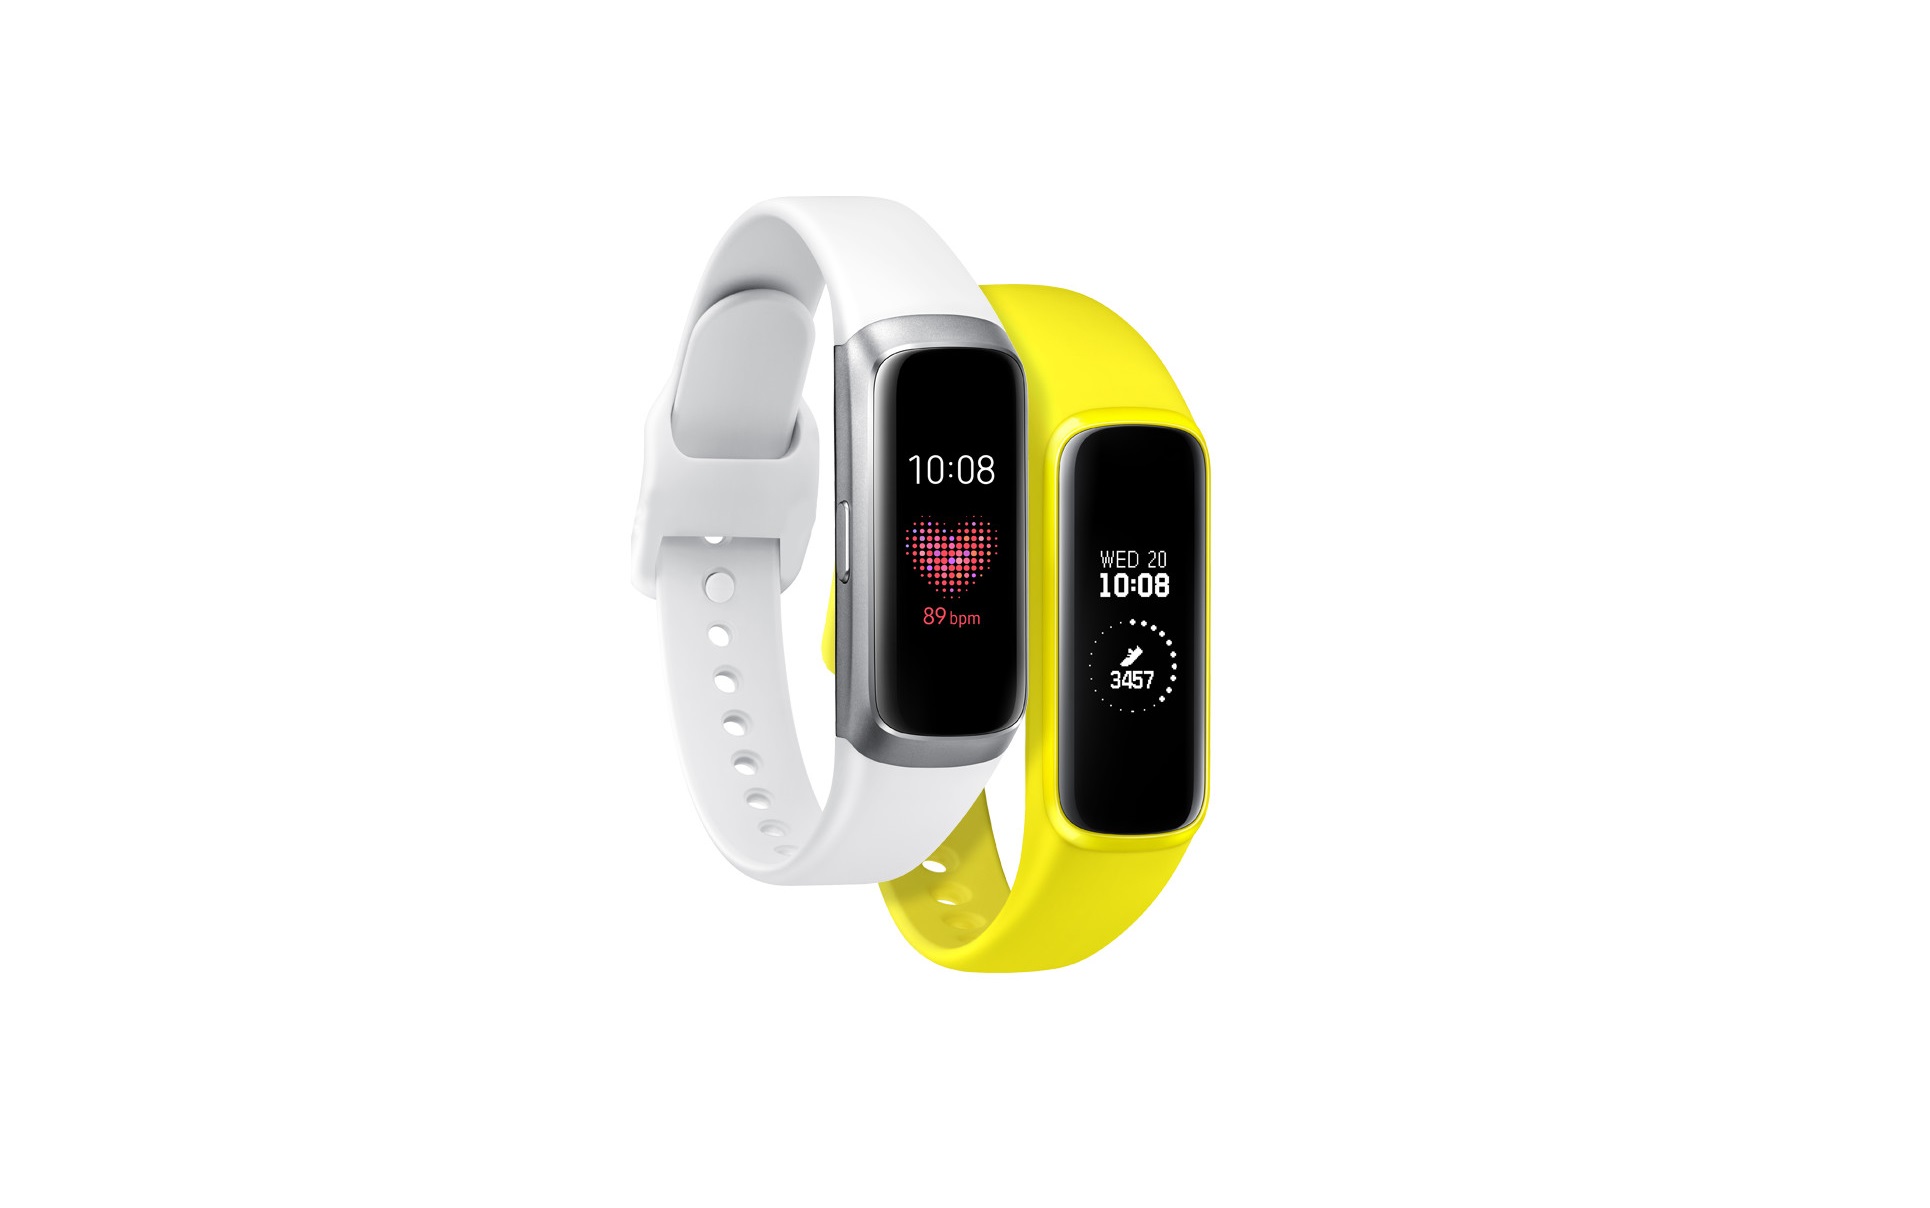 Samsung Galaxy Fit e. Самсунг галакси фит желтые. Galaxy Fit. Galaxy Fit Ace Mini gio. Samsung galaxy fit 3 pink